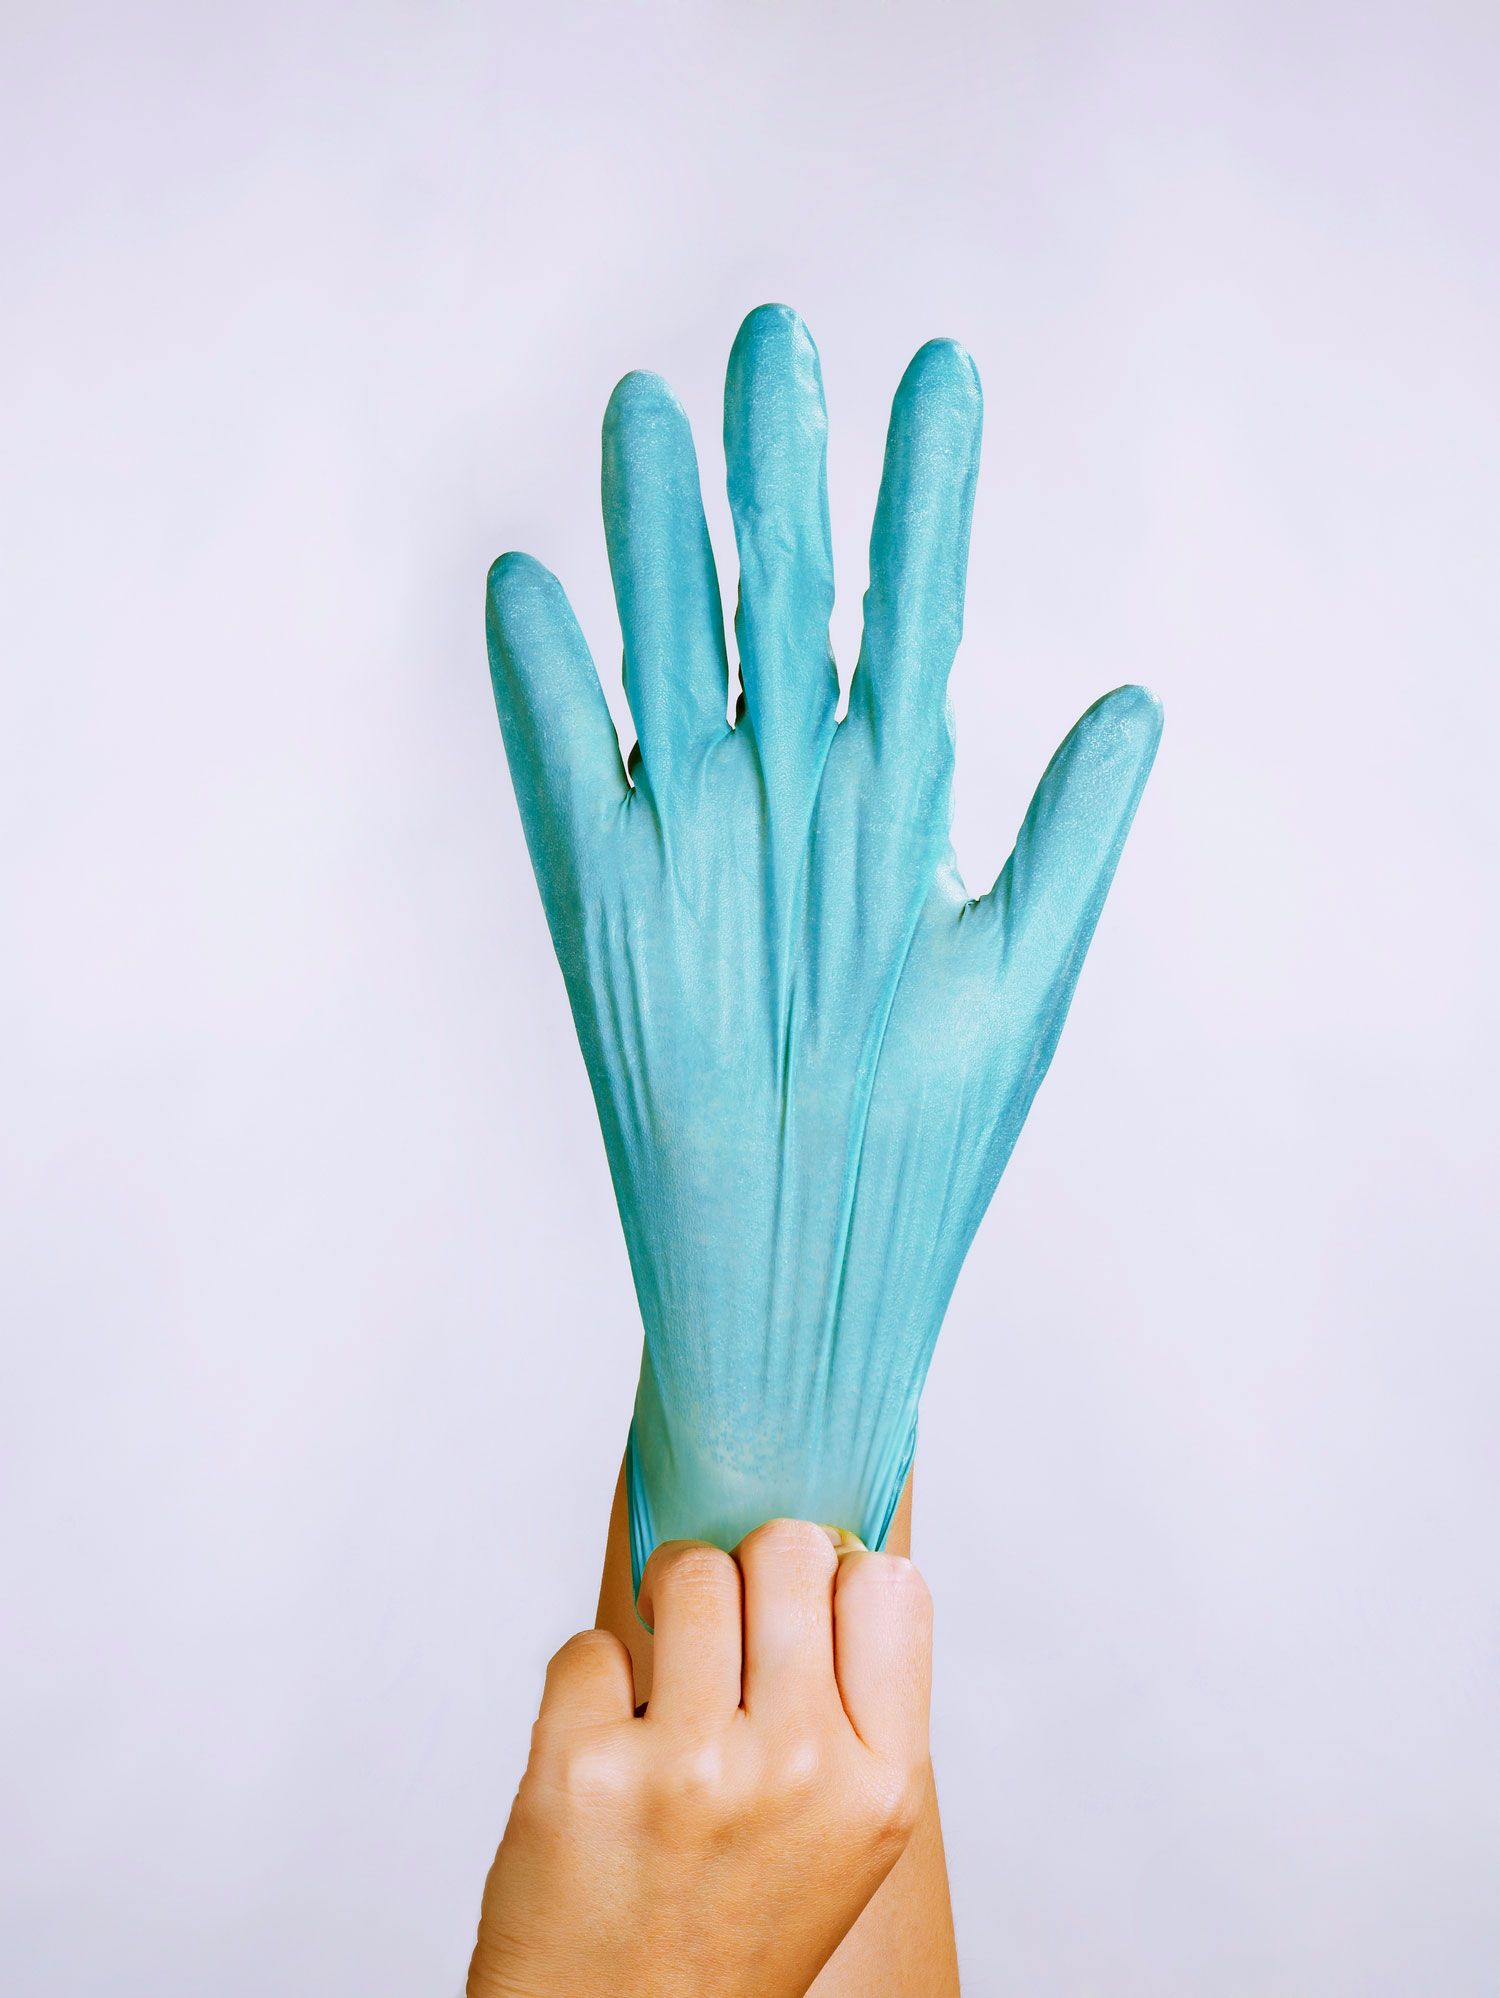 when using disposable gloves how often